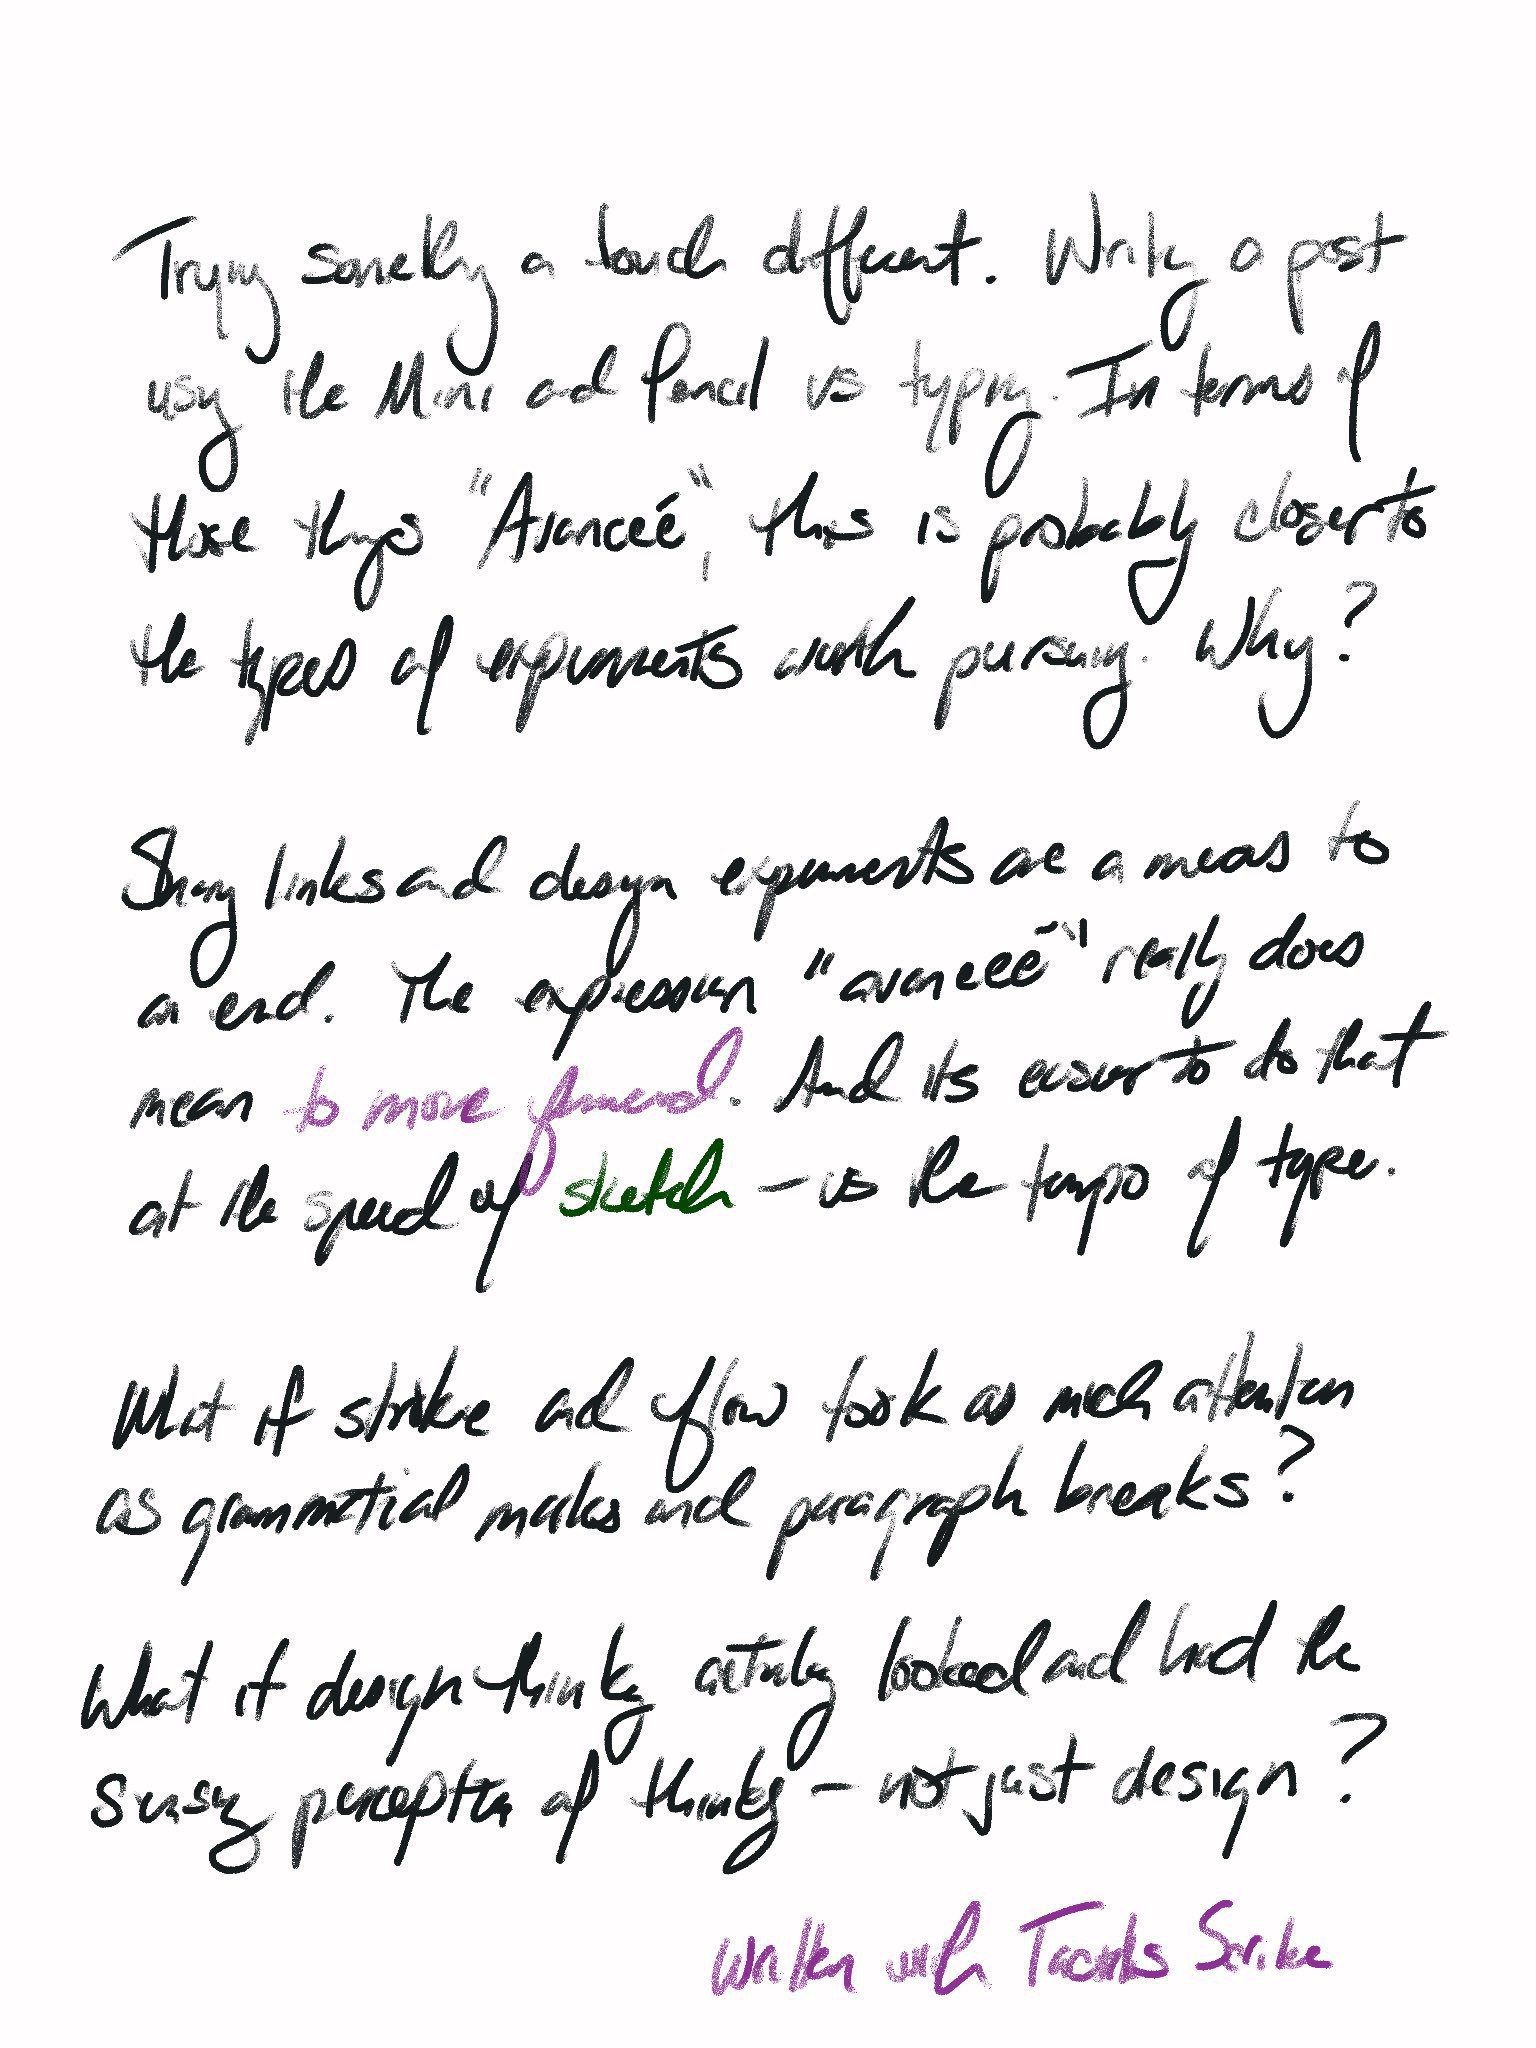 handwritten post; blame internet frameworks for making handwriting harder to read than typed text